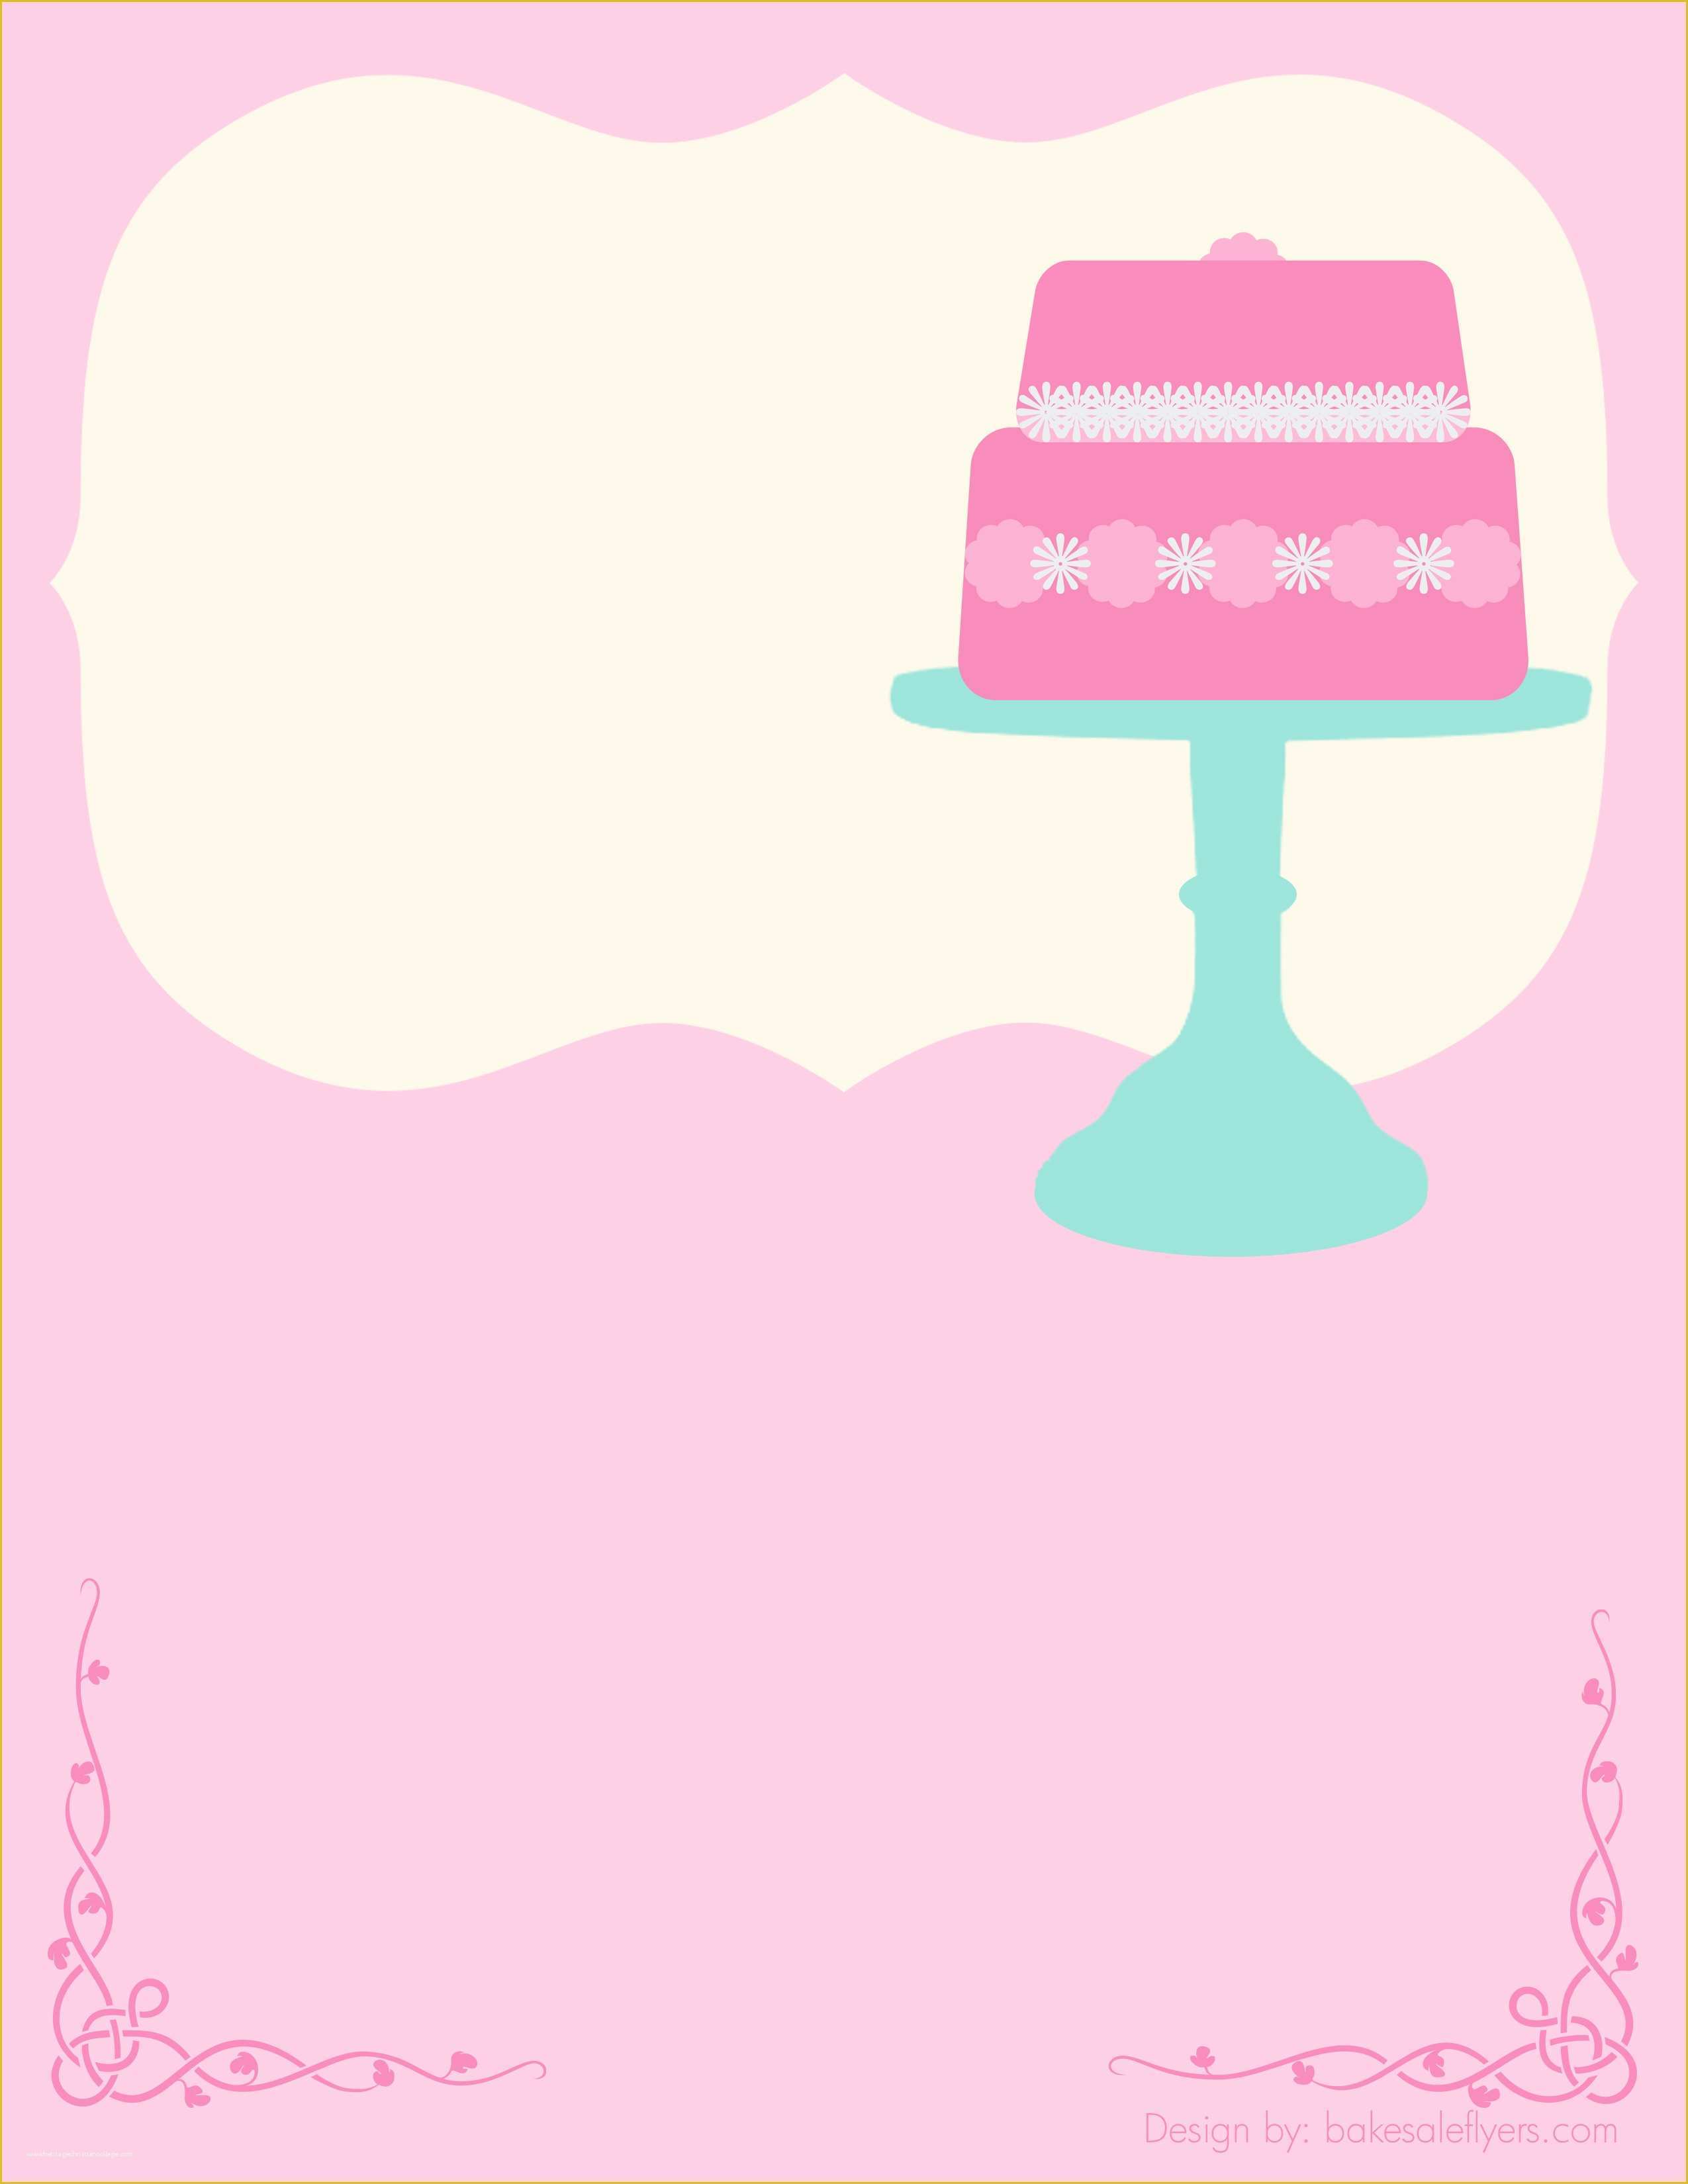 Free Printable Cake Templates Of Bake Sale Flyers – Free Flyer Designs